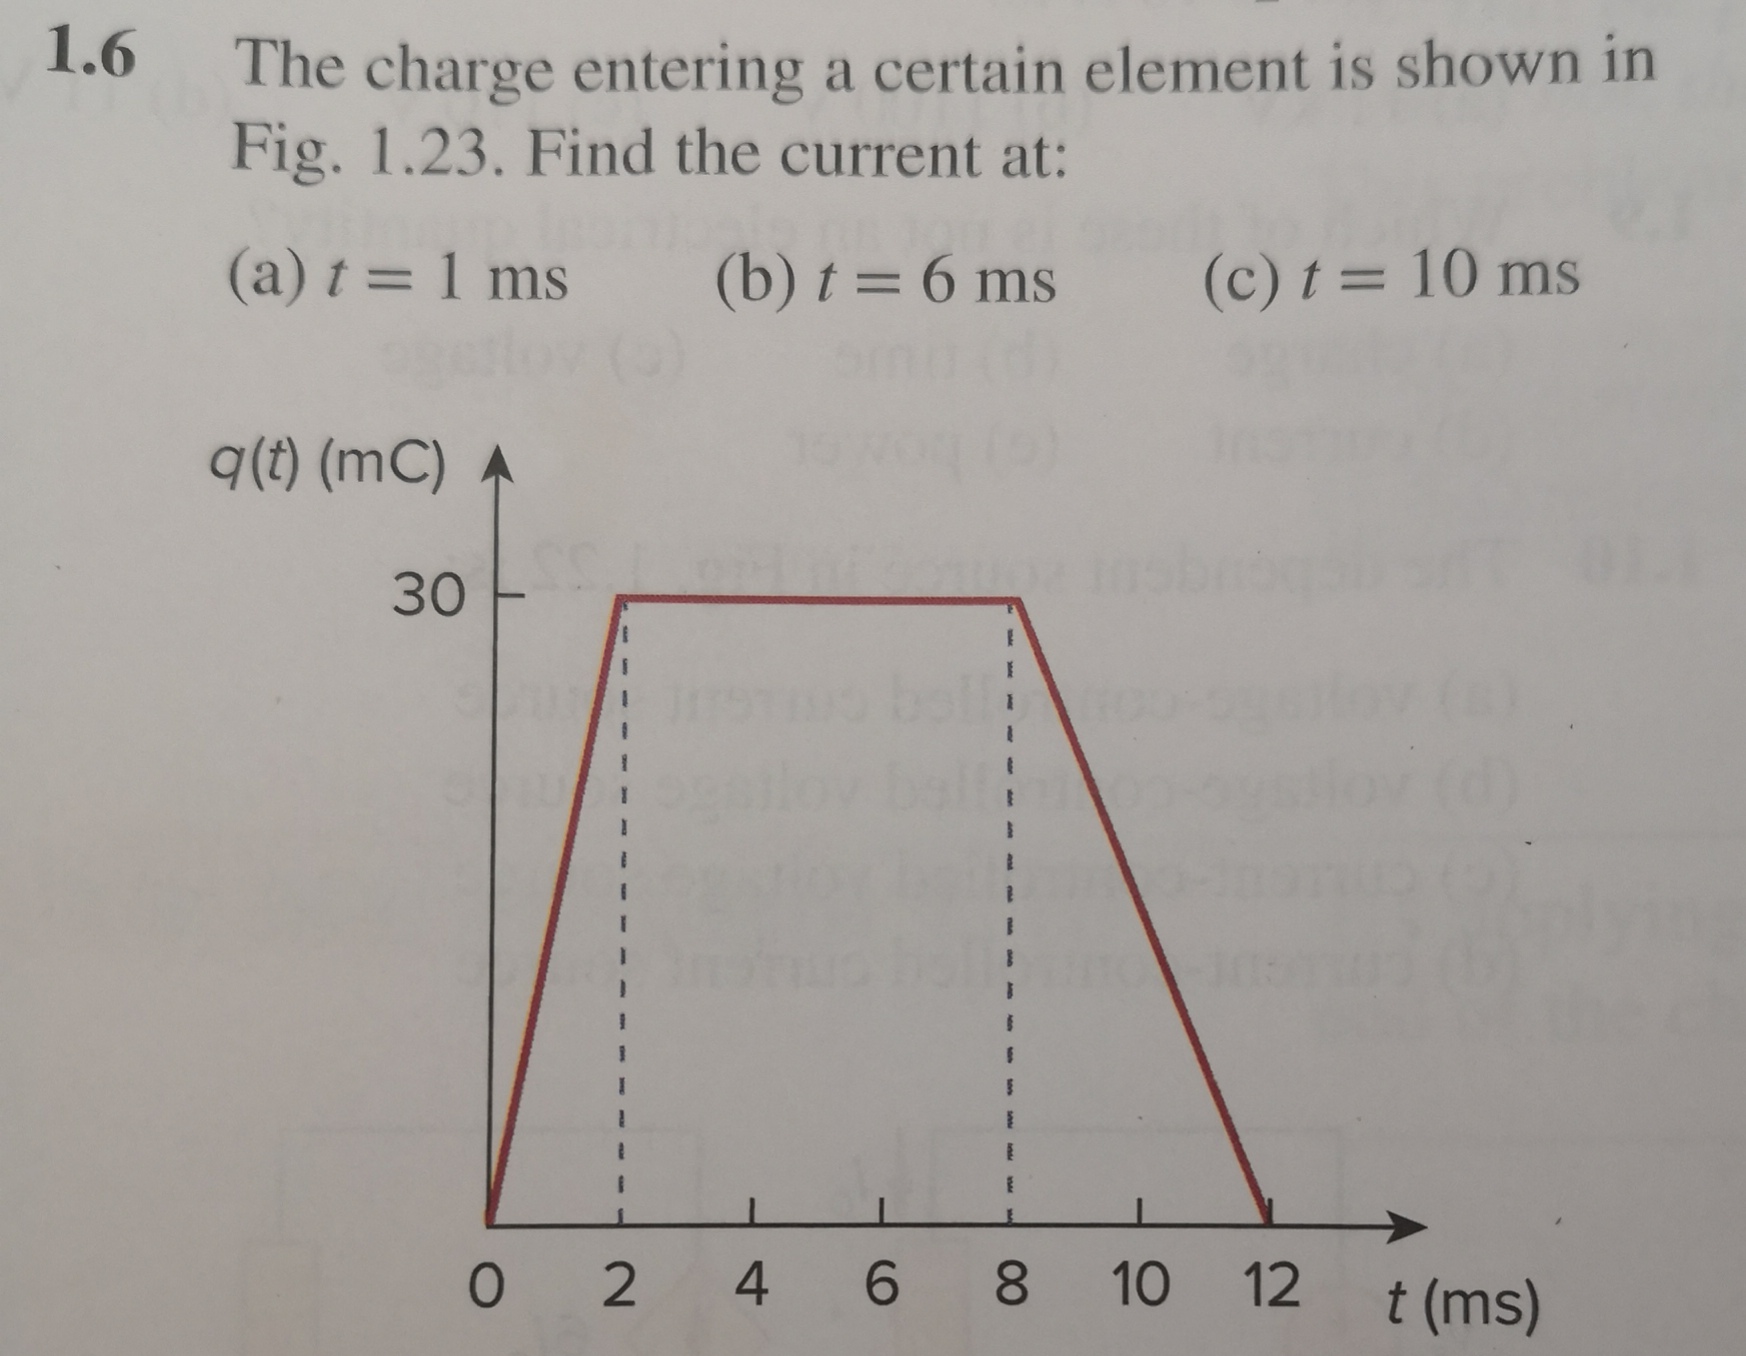 1.6
The charge entering a certain element is shown in
Fig. 1.23. Find the current at:
(a) t = 1 ms (b) t = 6 ms
q(t) (mC)
(c) t = 10 ms
30
O 2 4 6 8 10 12 t (ms)
